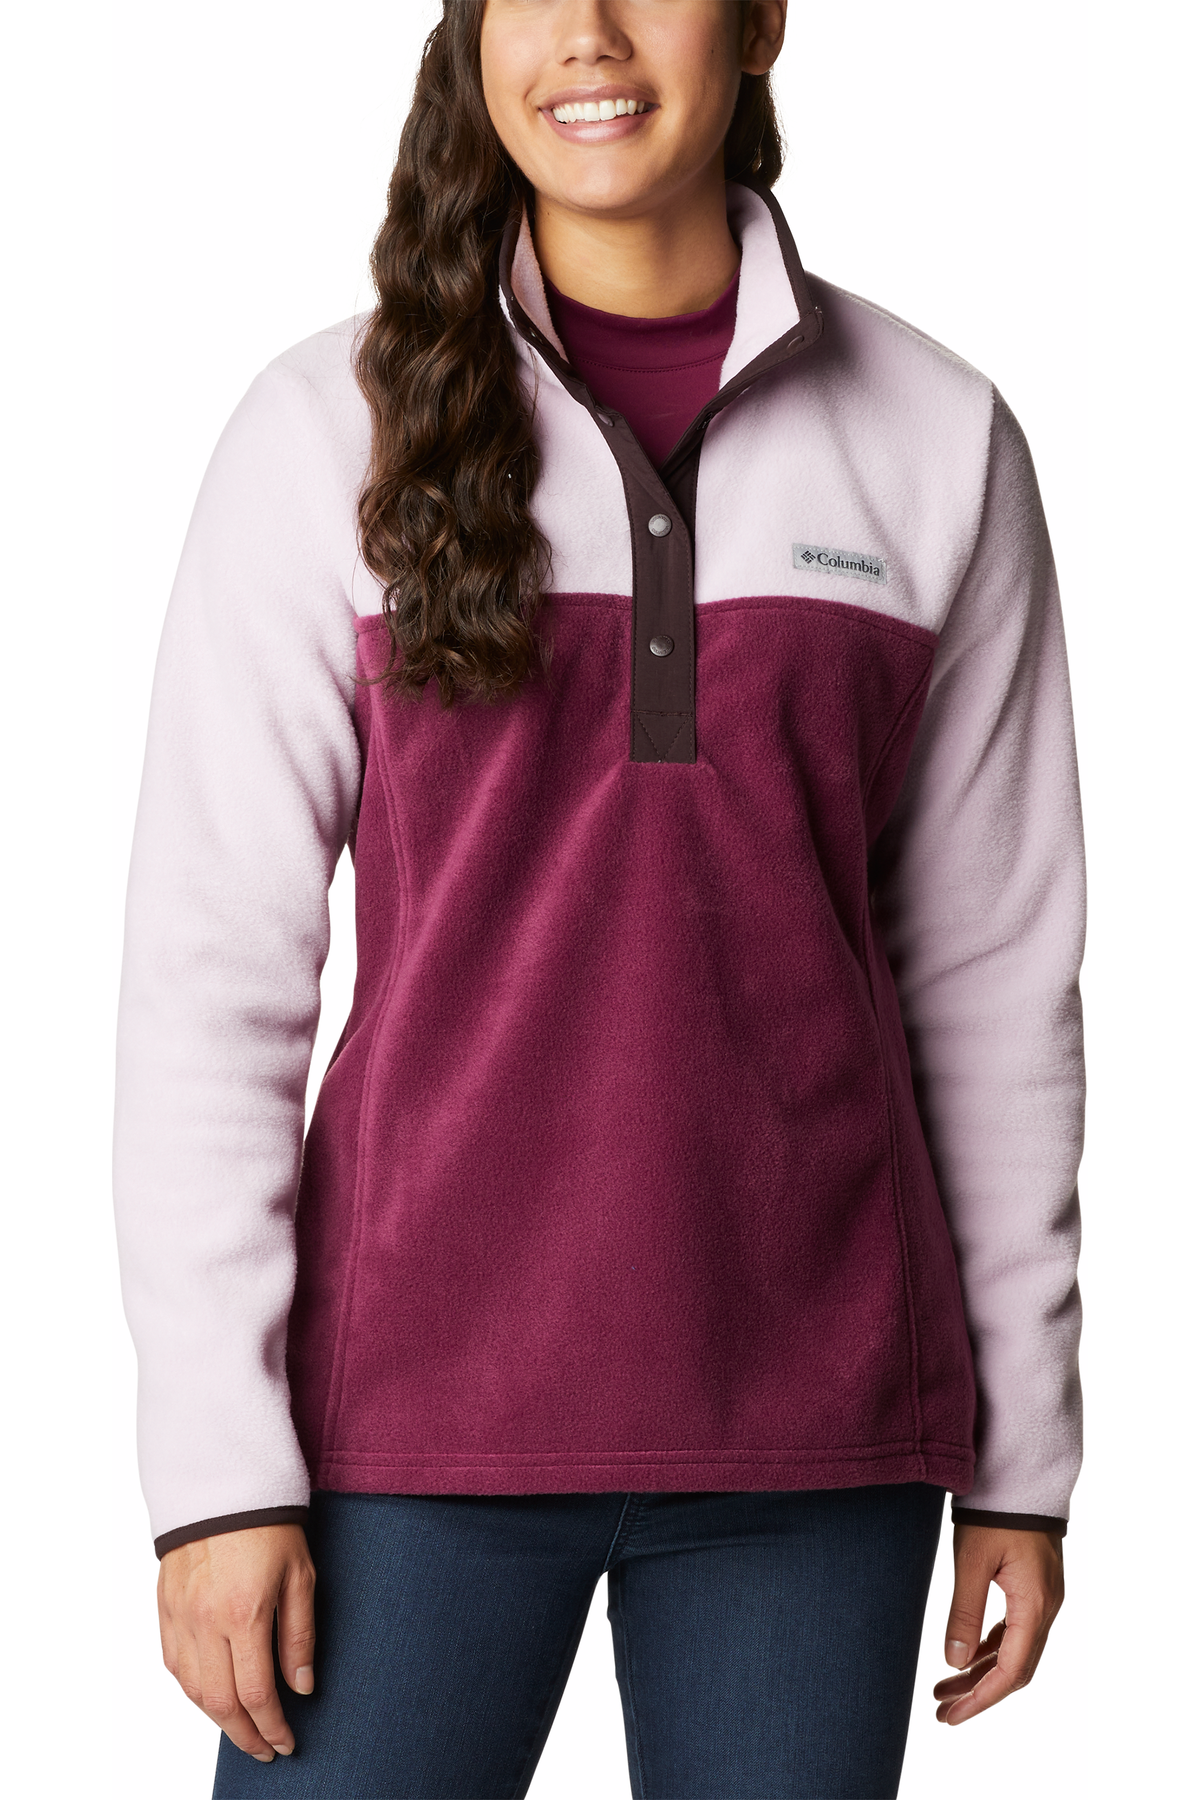 Columbia Benton Springs 1/2 Snap Pullover - Style 1860991616, front